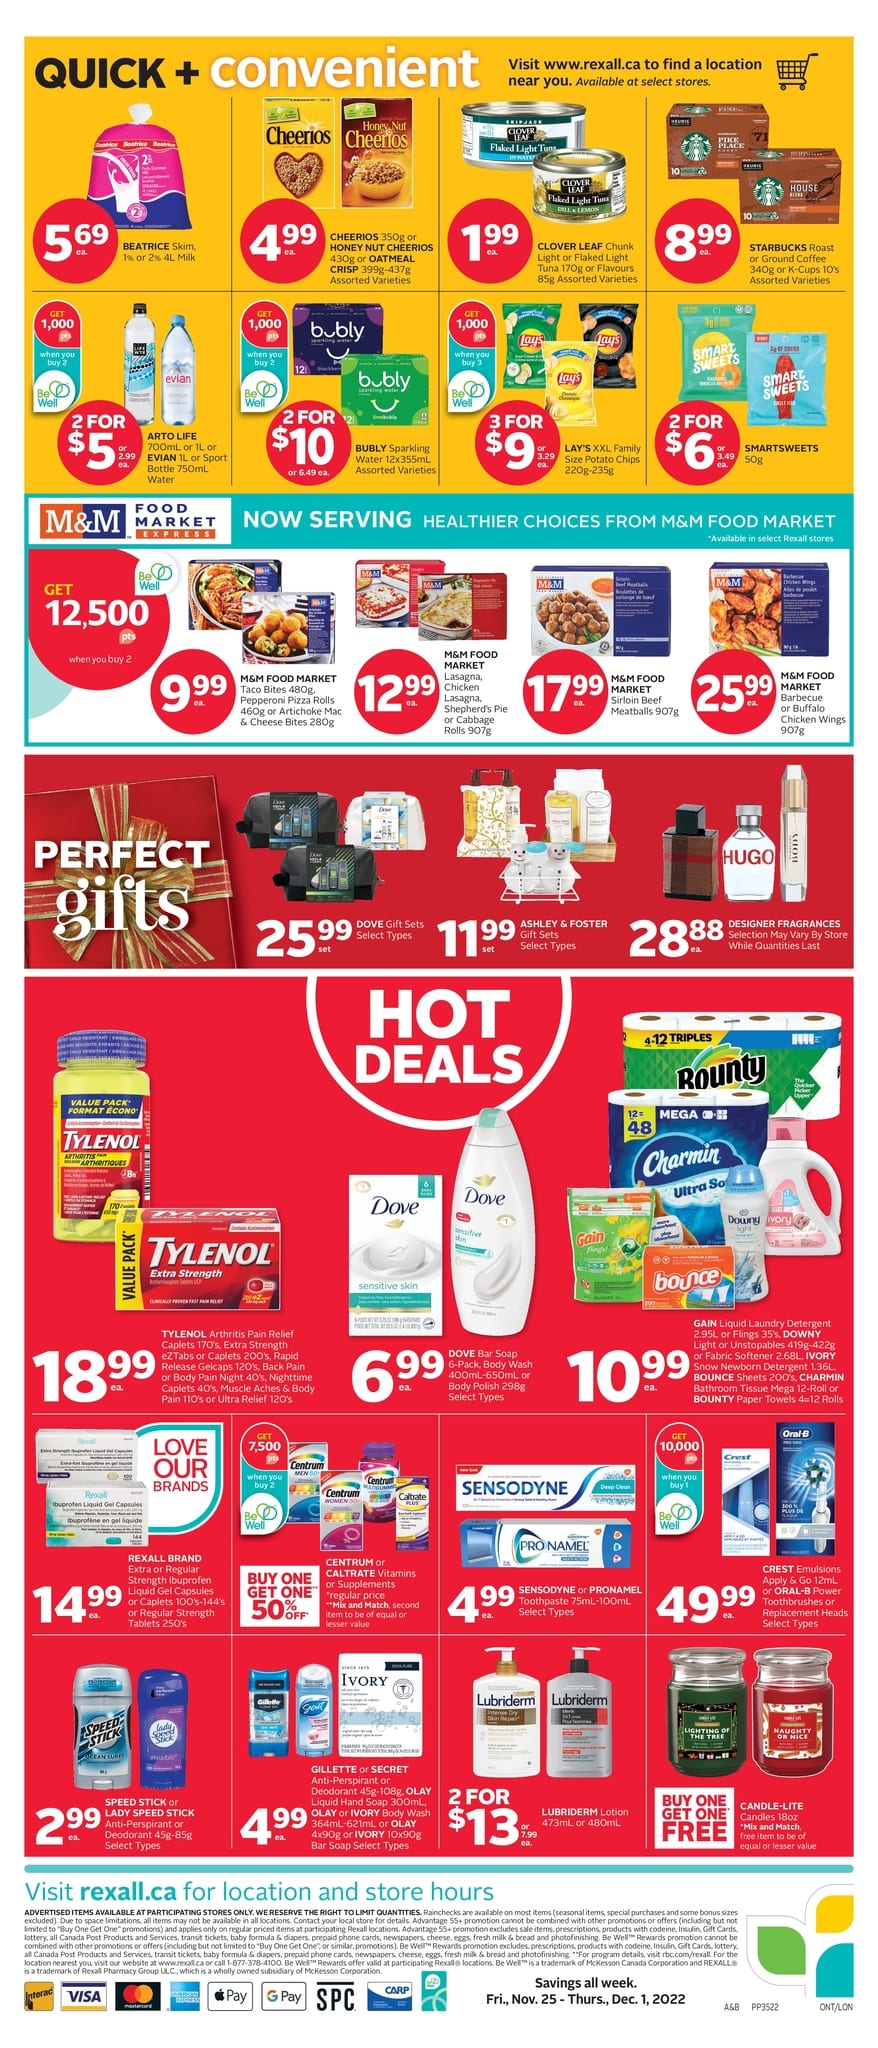 Rexall - Weekly Flyer Specials - Black Friday Deals - Page 3